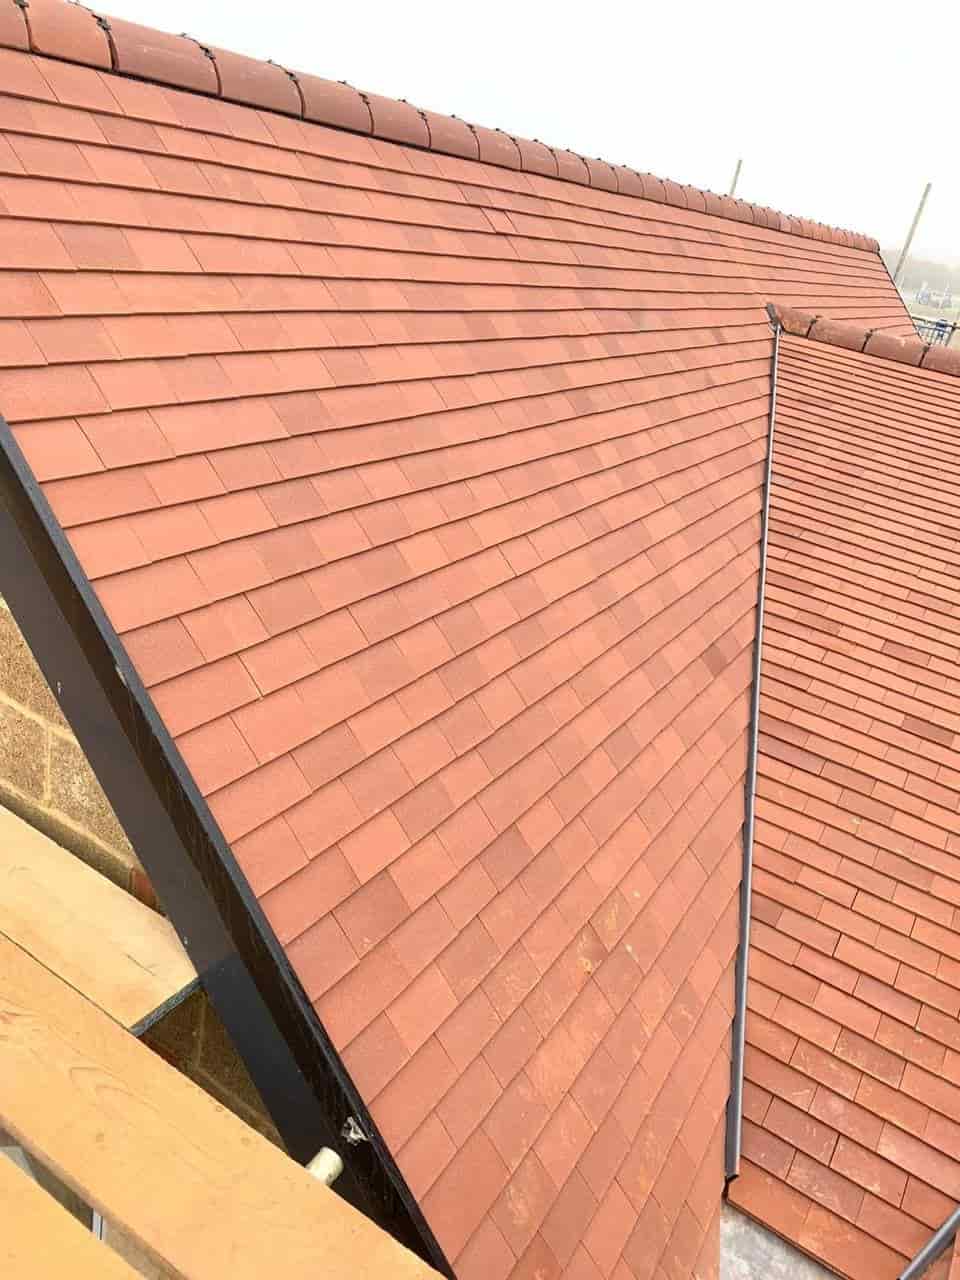 this is a photo of a new build roof installed in Whitstable. All works carried out by Whitstable Roofers